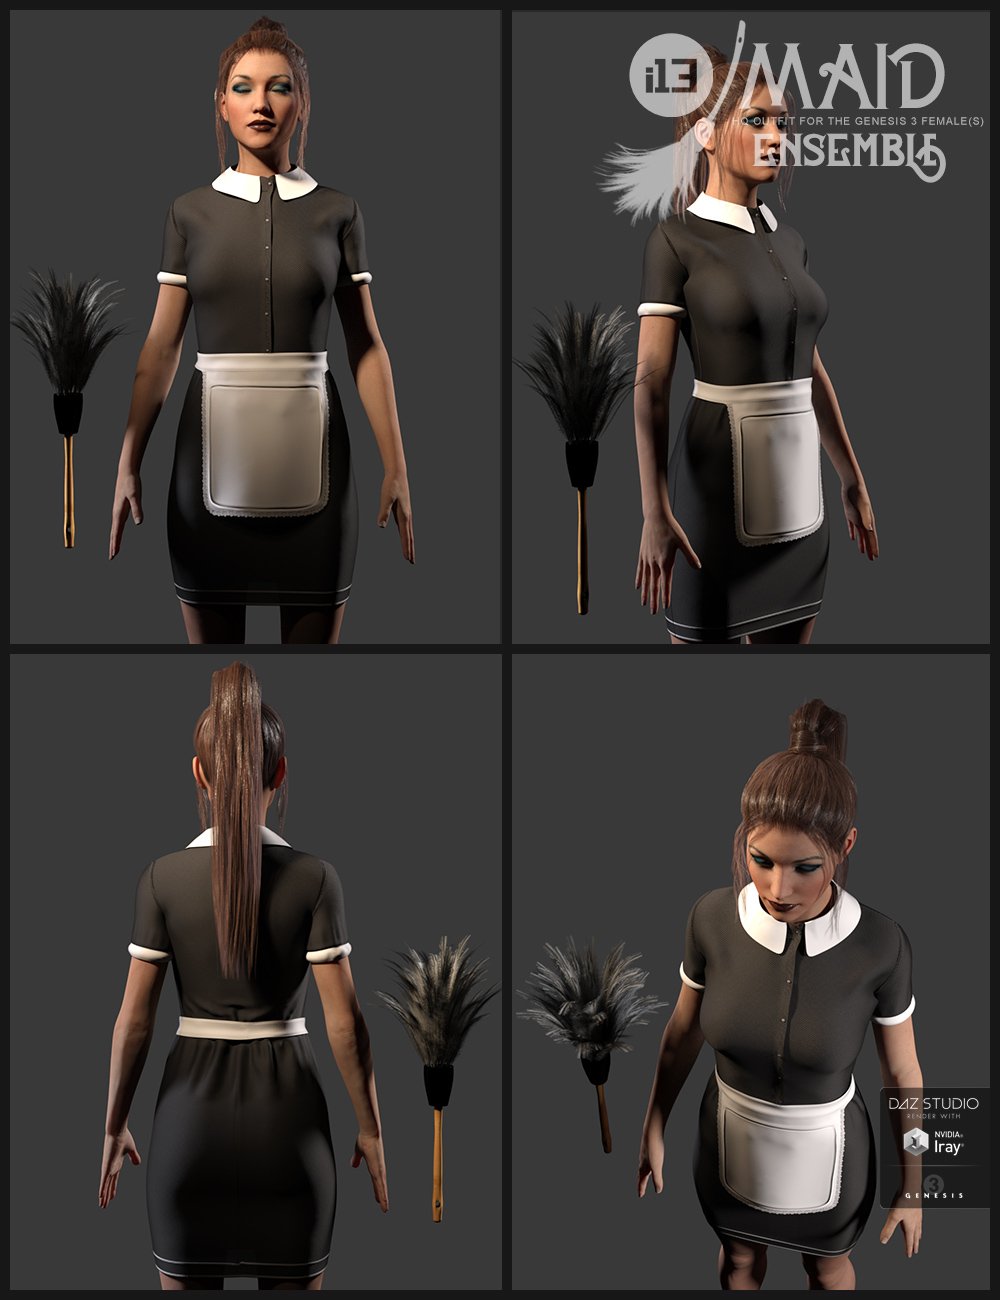 i13 Maid Ensemble and Poses for the Genesis 3 Female(s) by: ironman13, 3D Models by Daz 3D